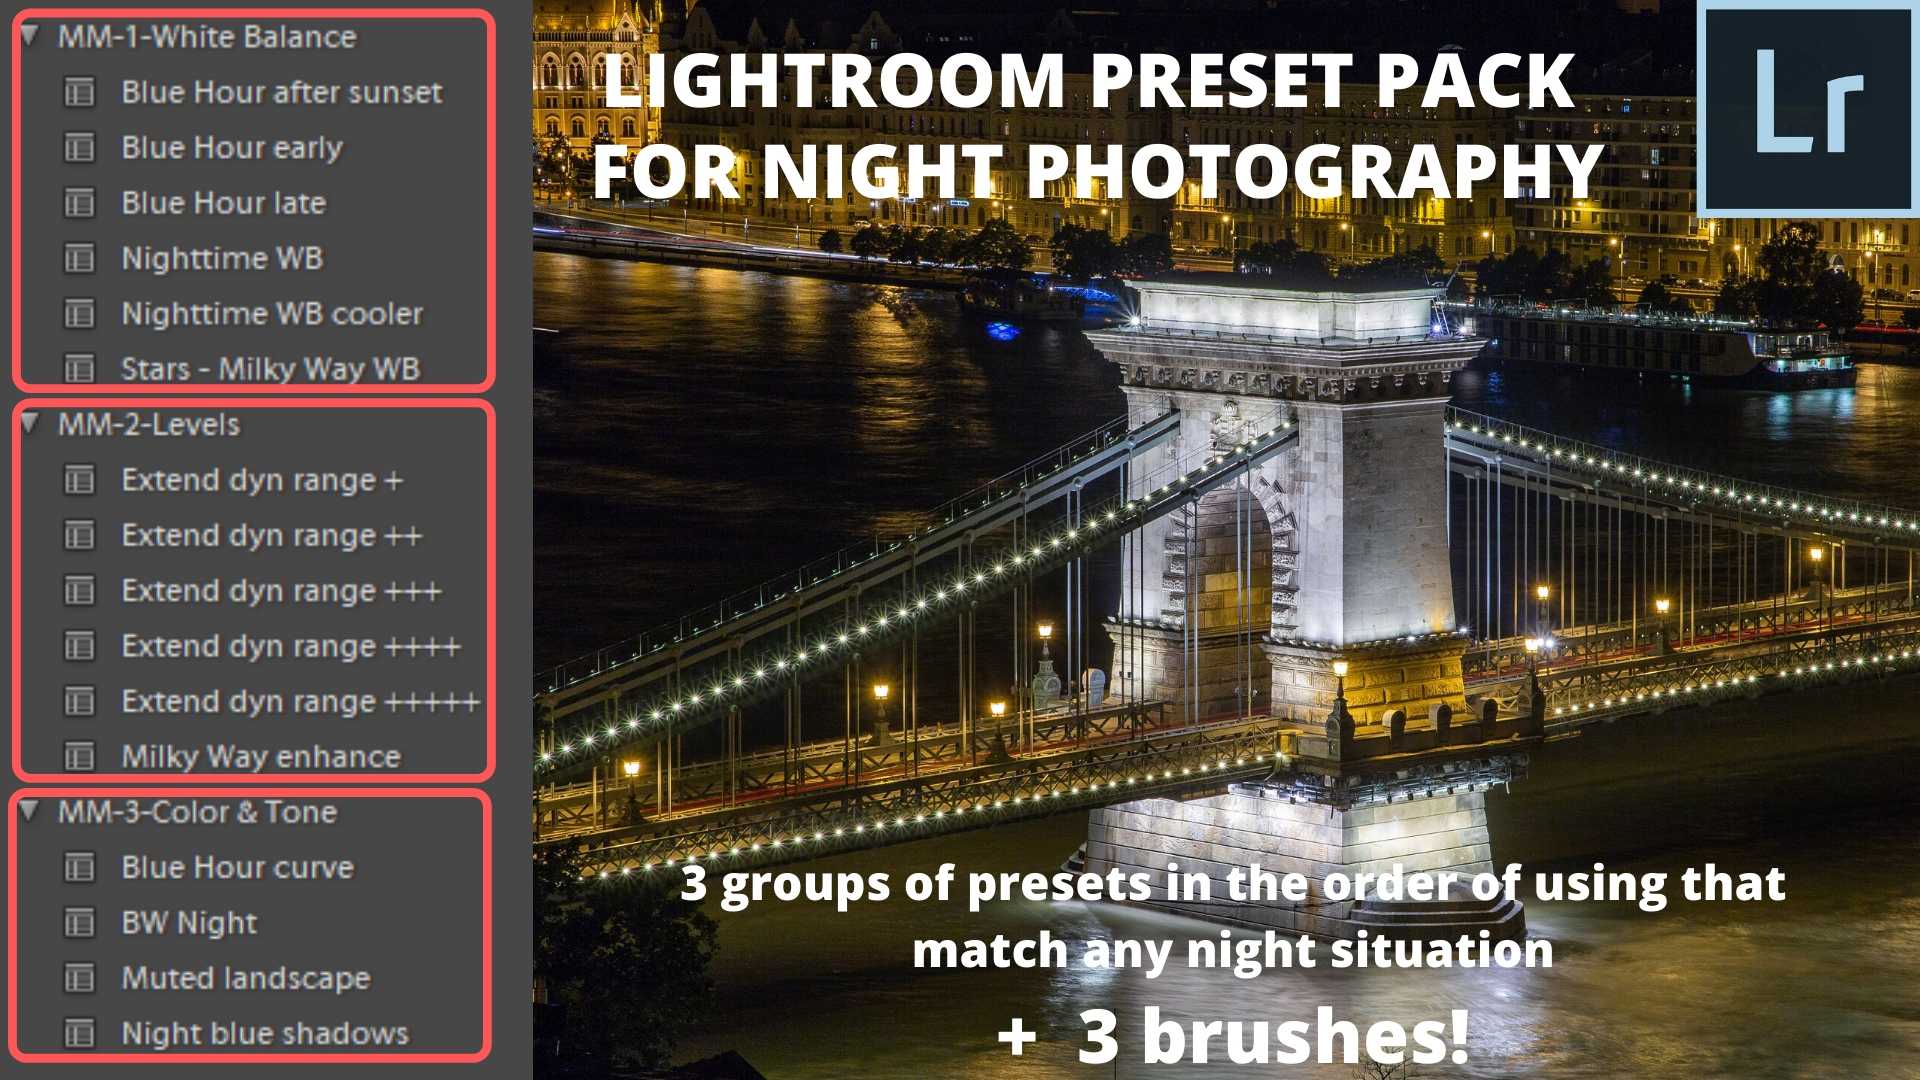 lightroom preset pack for night photography